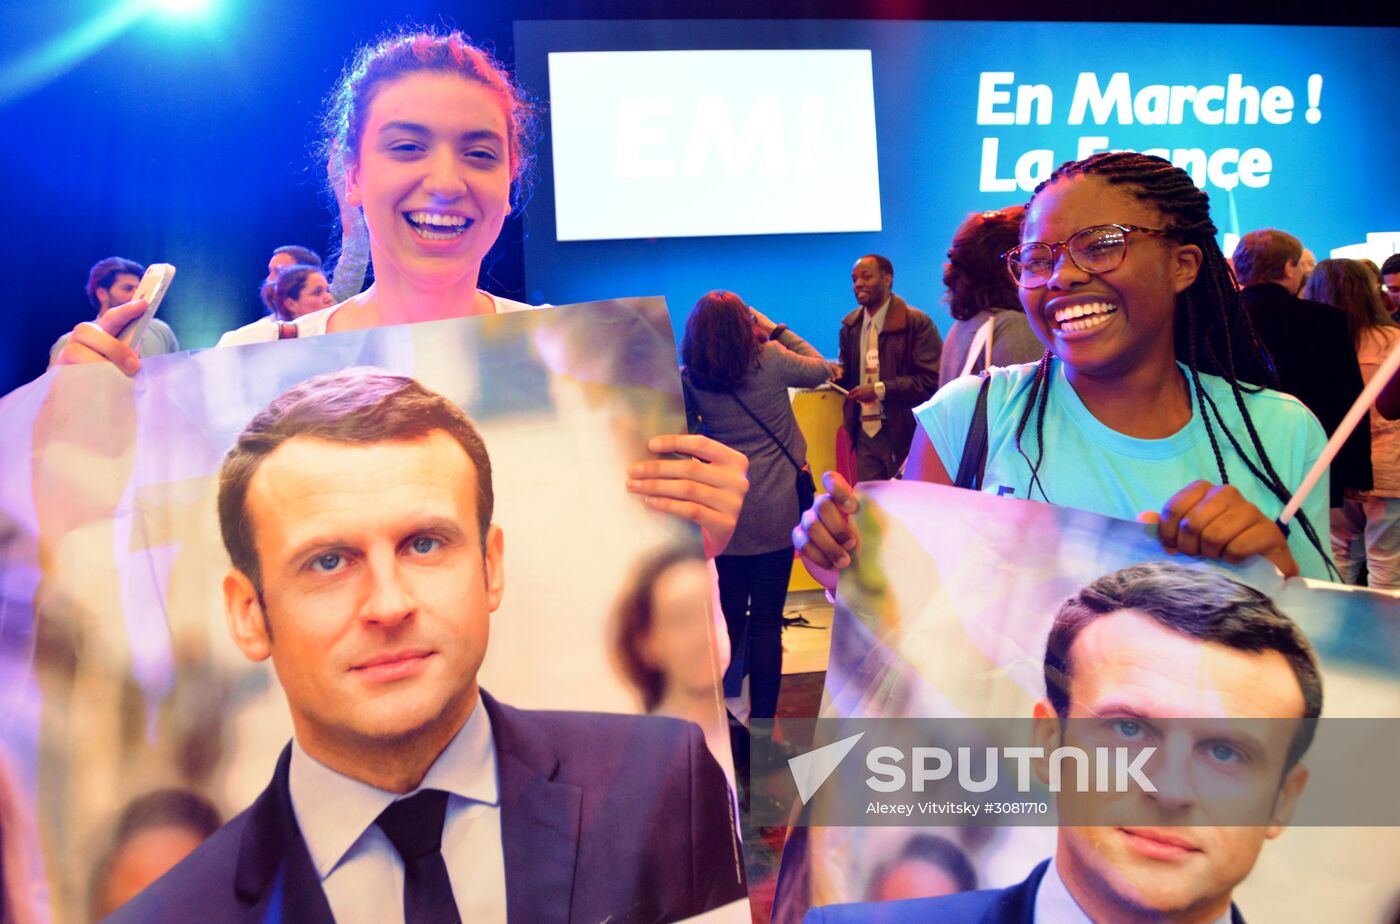 First round of France's presidential election